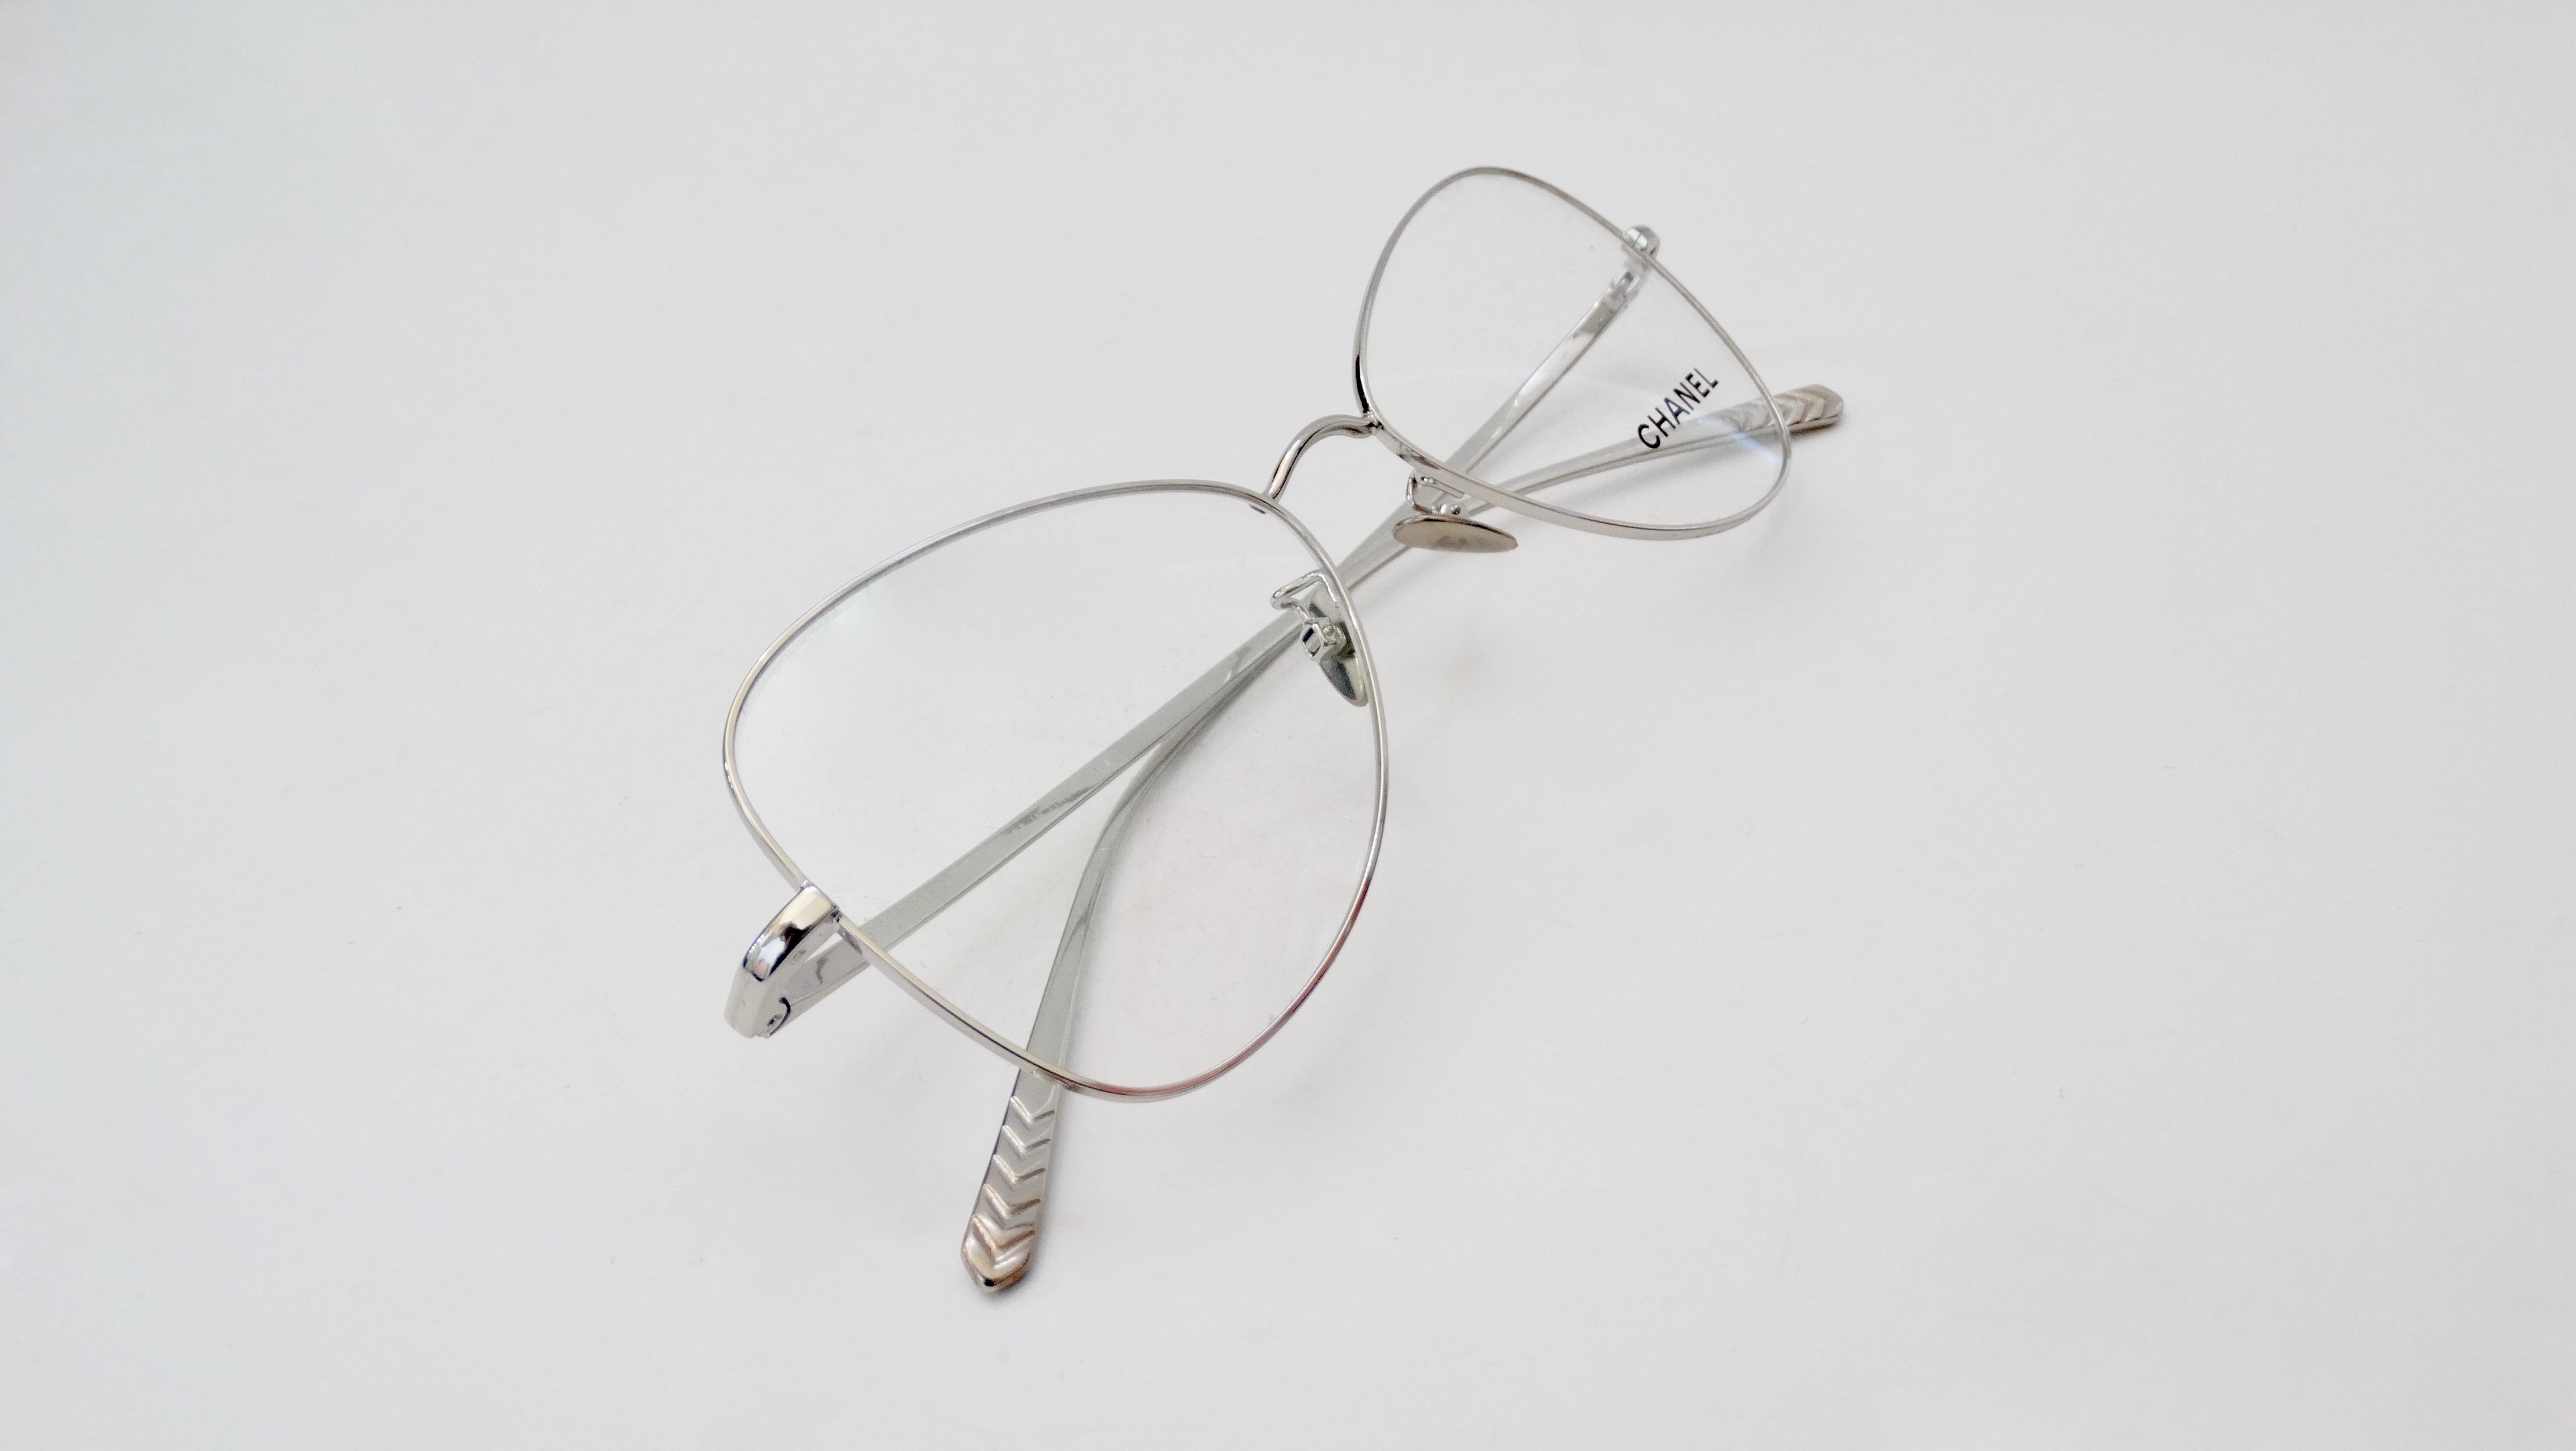 Chanel Fall 2019 Silver Eye Glasses  In Good Condition For Sale In Scottsdale, AZ